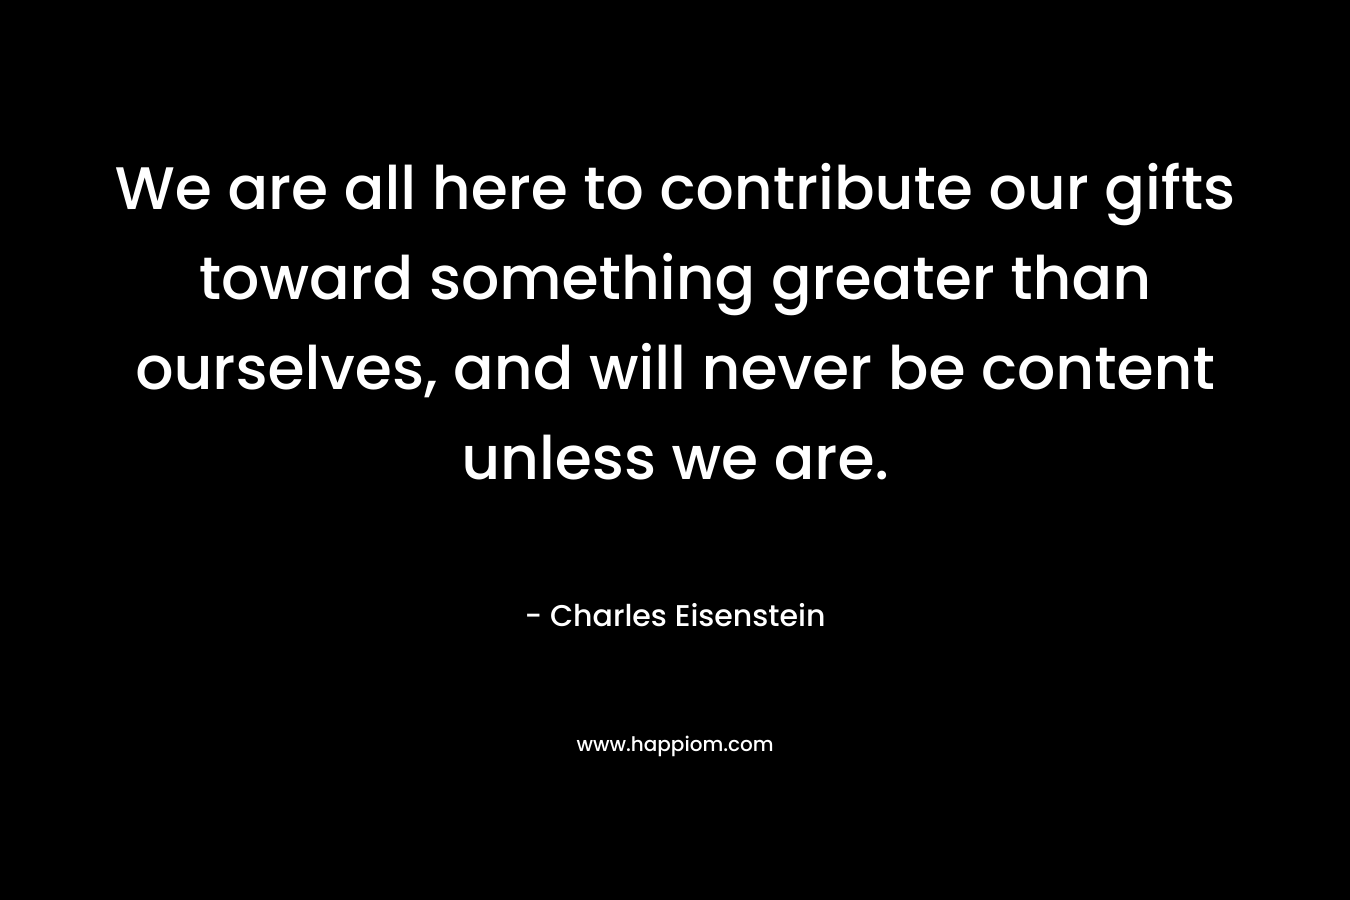 We are all here to contribute our gifts toward something greater than ourselves, and will never be content unless we are. – Charles Eisenstein